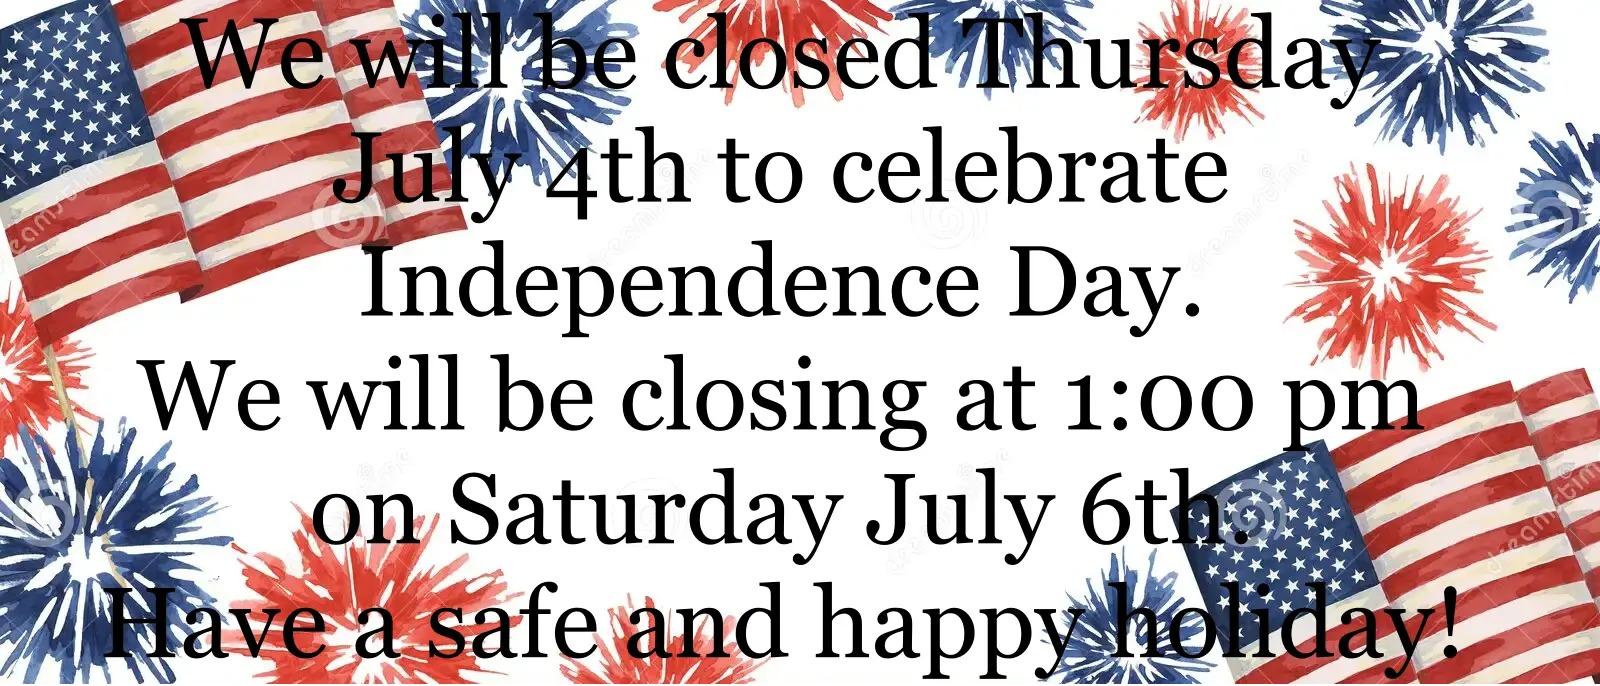 hours for the week of the 4th of July.